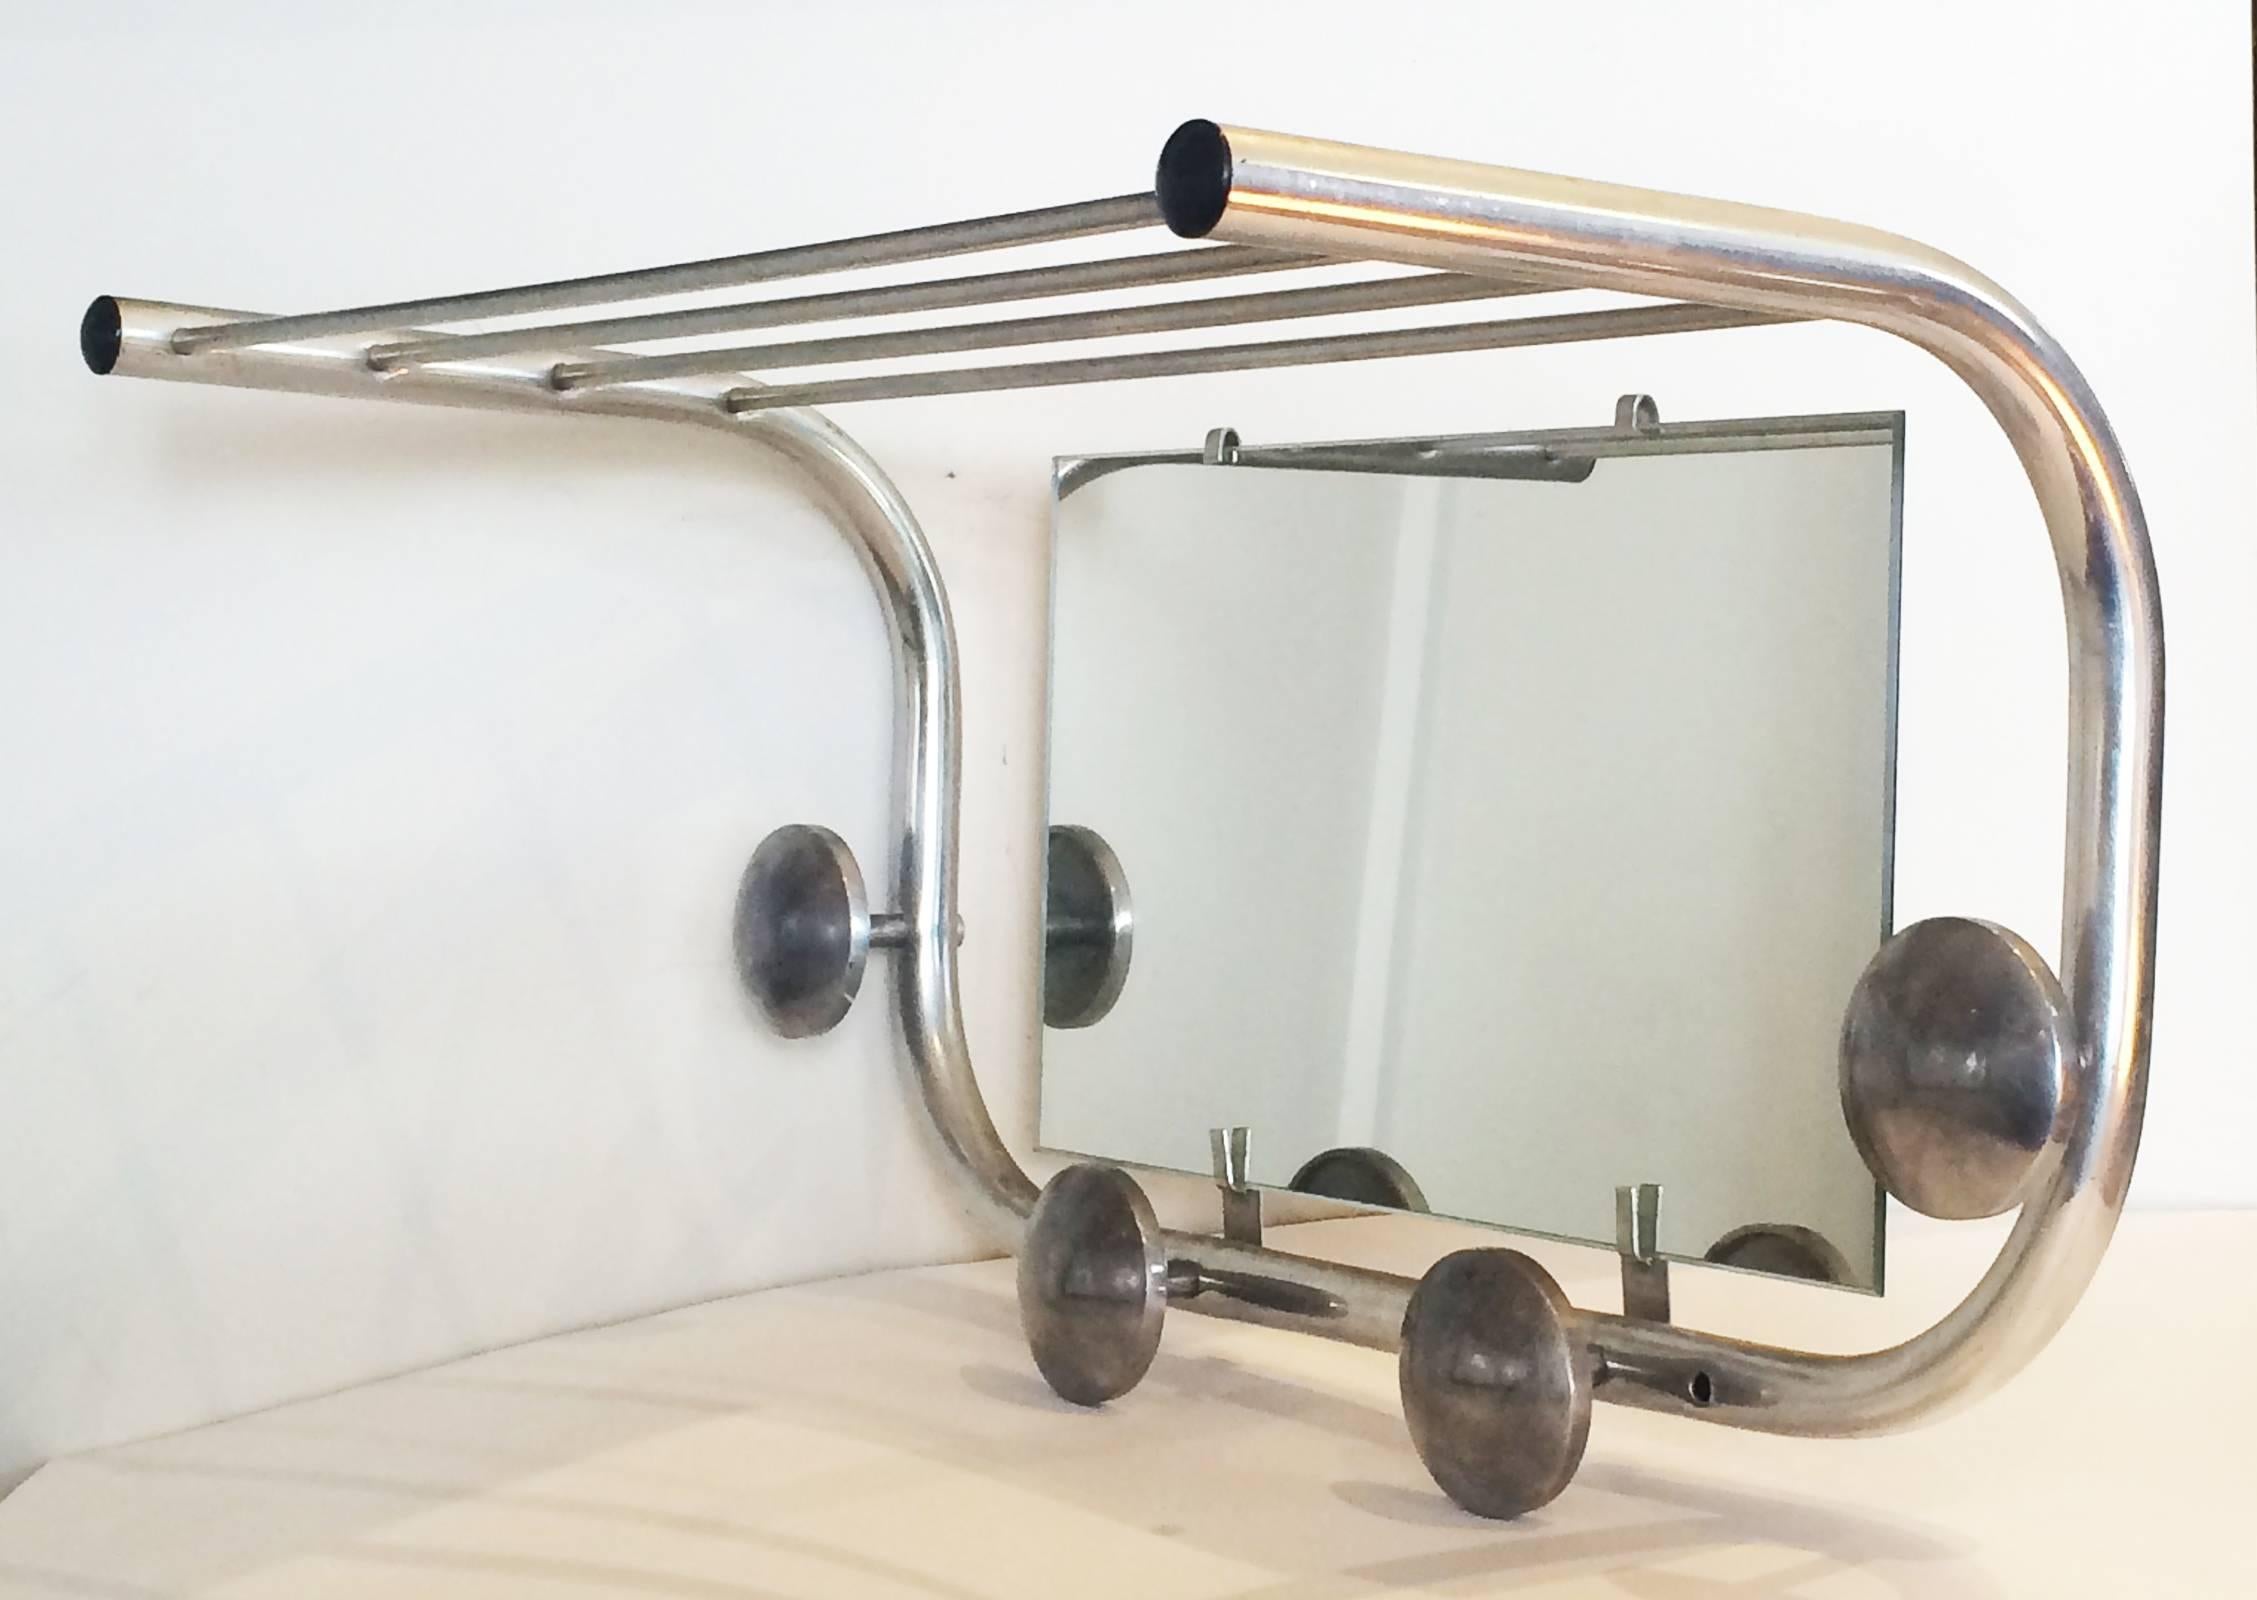 Art Deco polished aluminium wall rack for hats and coats, and fitted with mirror. All excellent condition, no damage or repairs. Perfect for the entrance hallway for incoming hats and coats. Dimensions are approximate: Frame, 44cm wide x 24cm high x